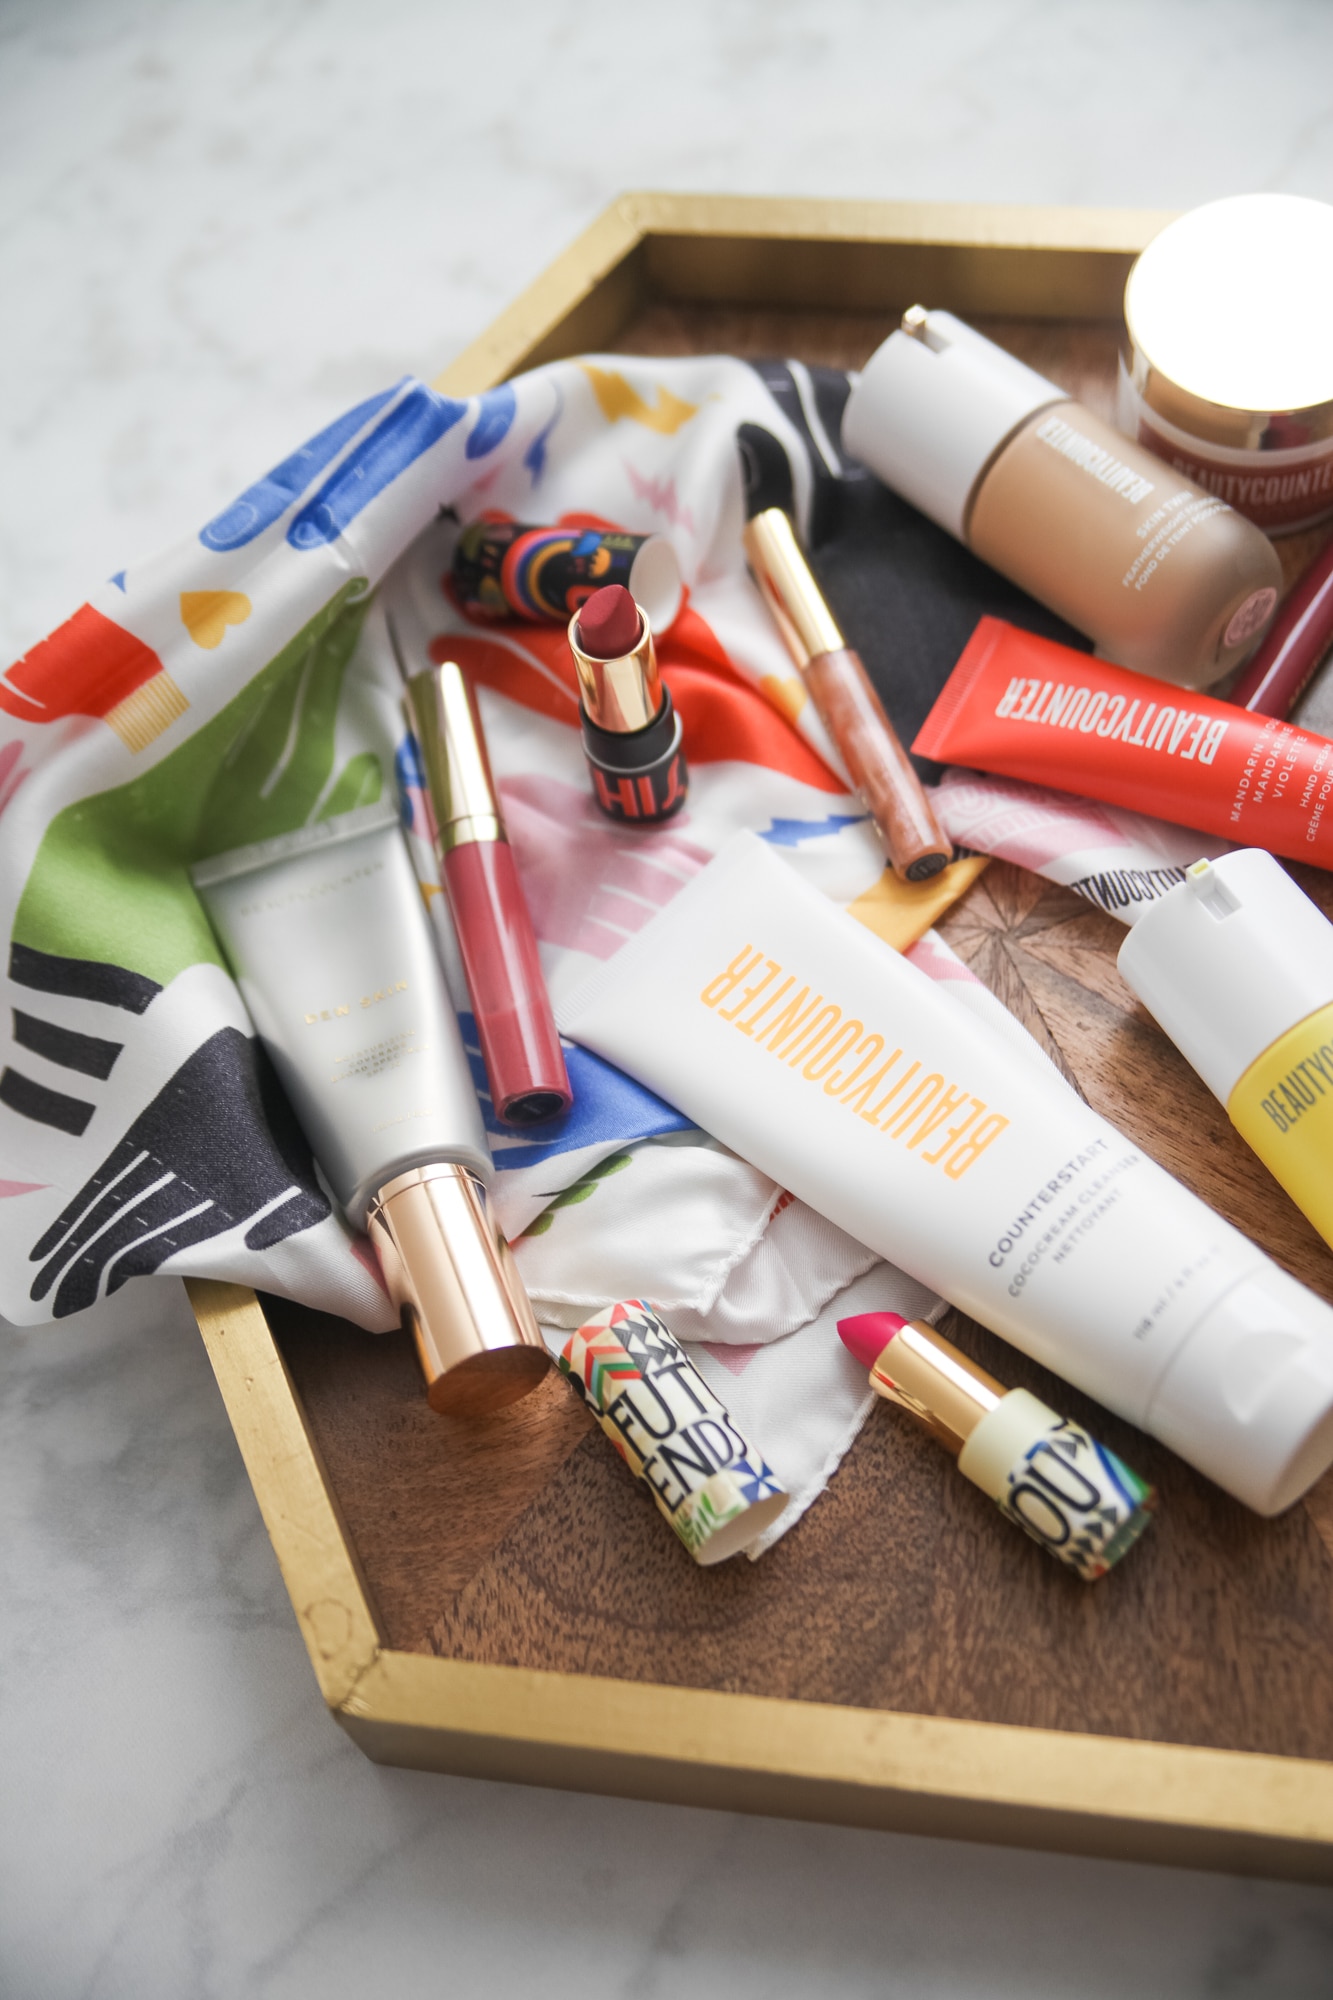 beautycounter products with a purpose on a gold tray